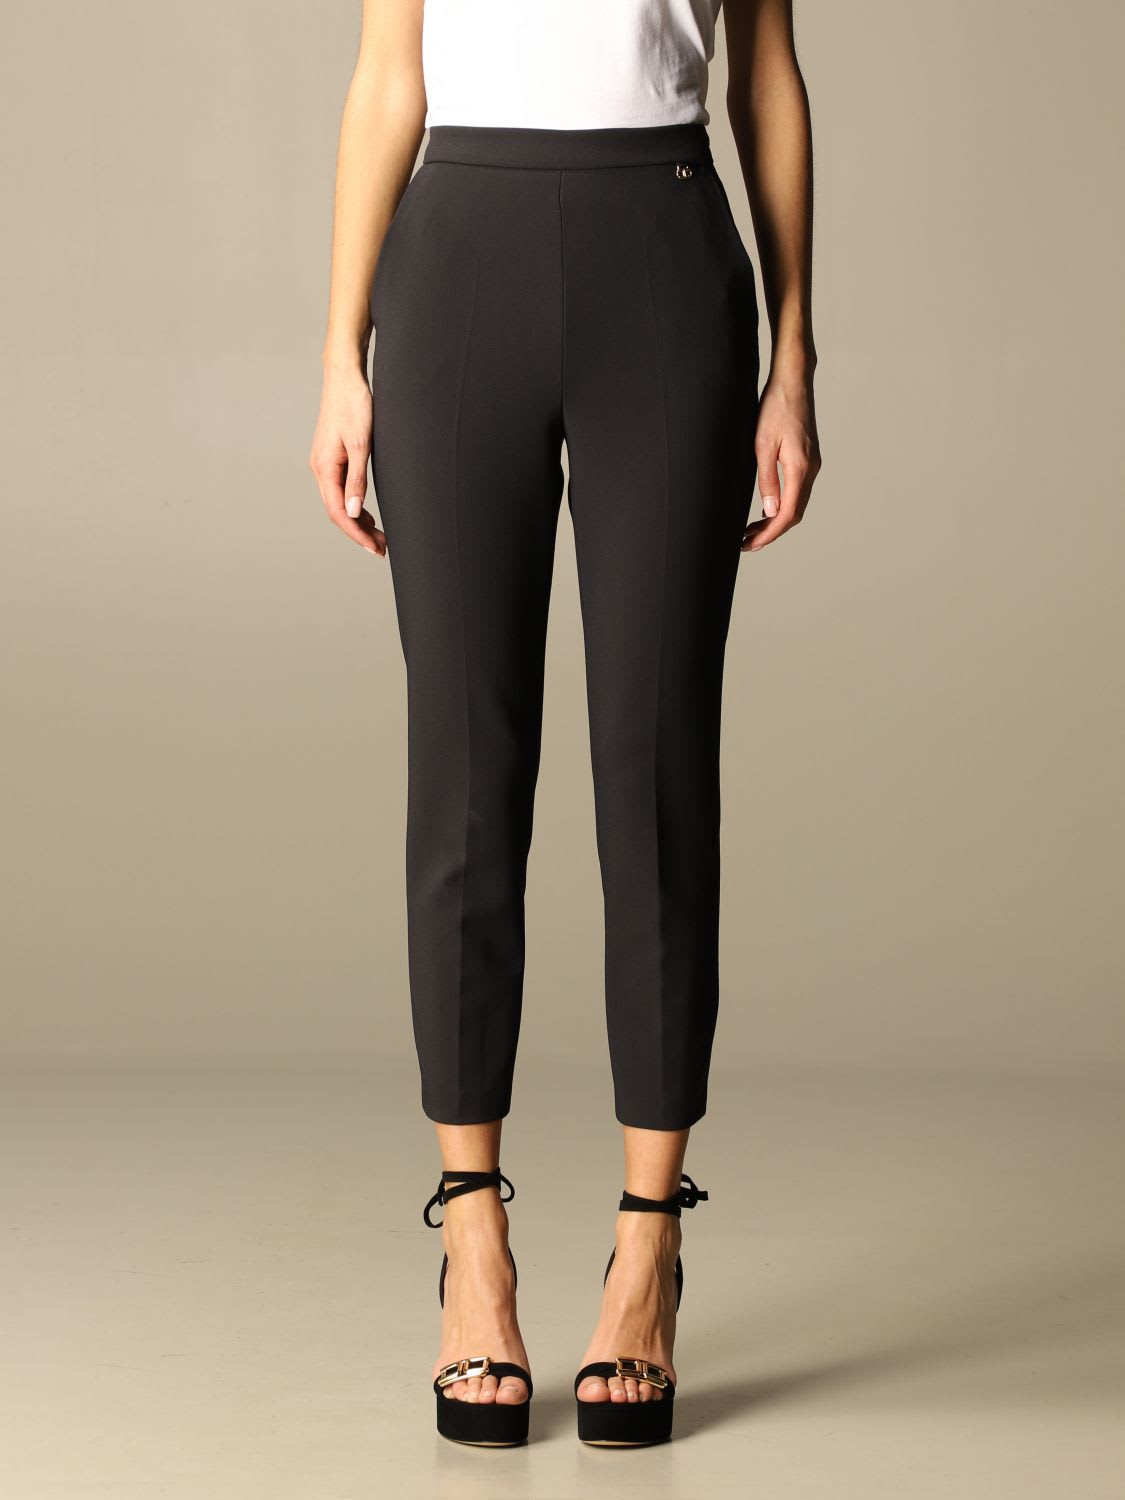 Elisabetta Franchi Pants Elisabetta Franchi Pants In Technical Cady